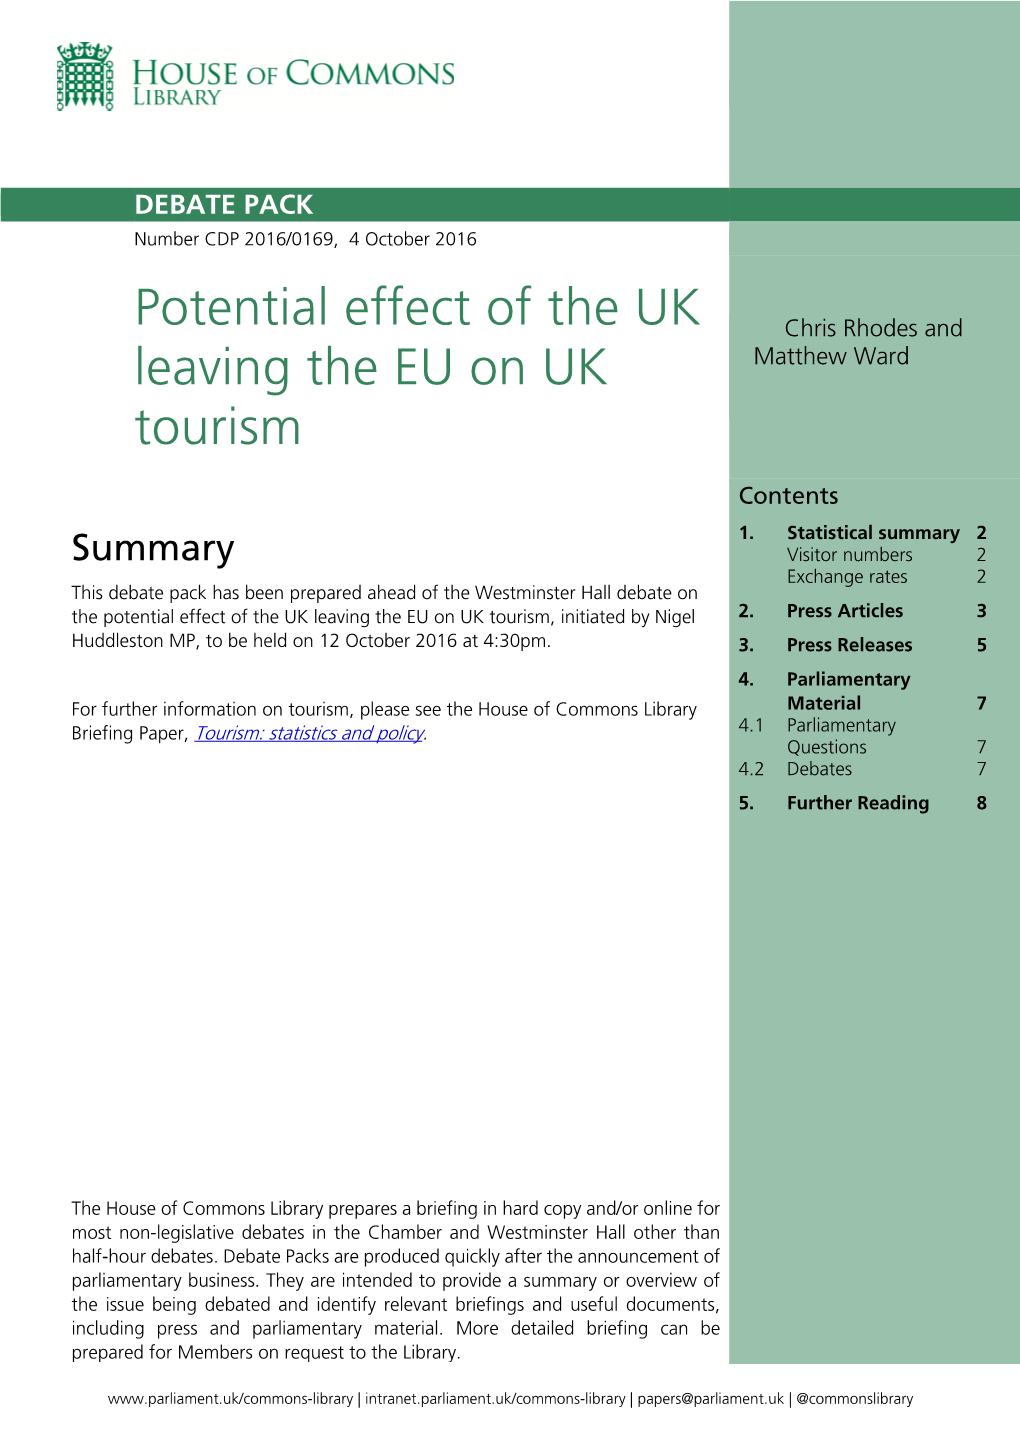 Potential Effect of the UK Leaving the EU on UK Tourism, Initiated by Nigel 2